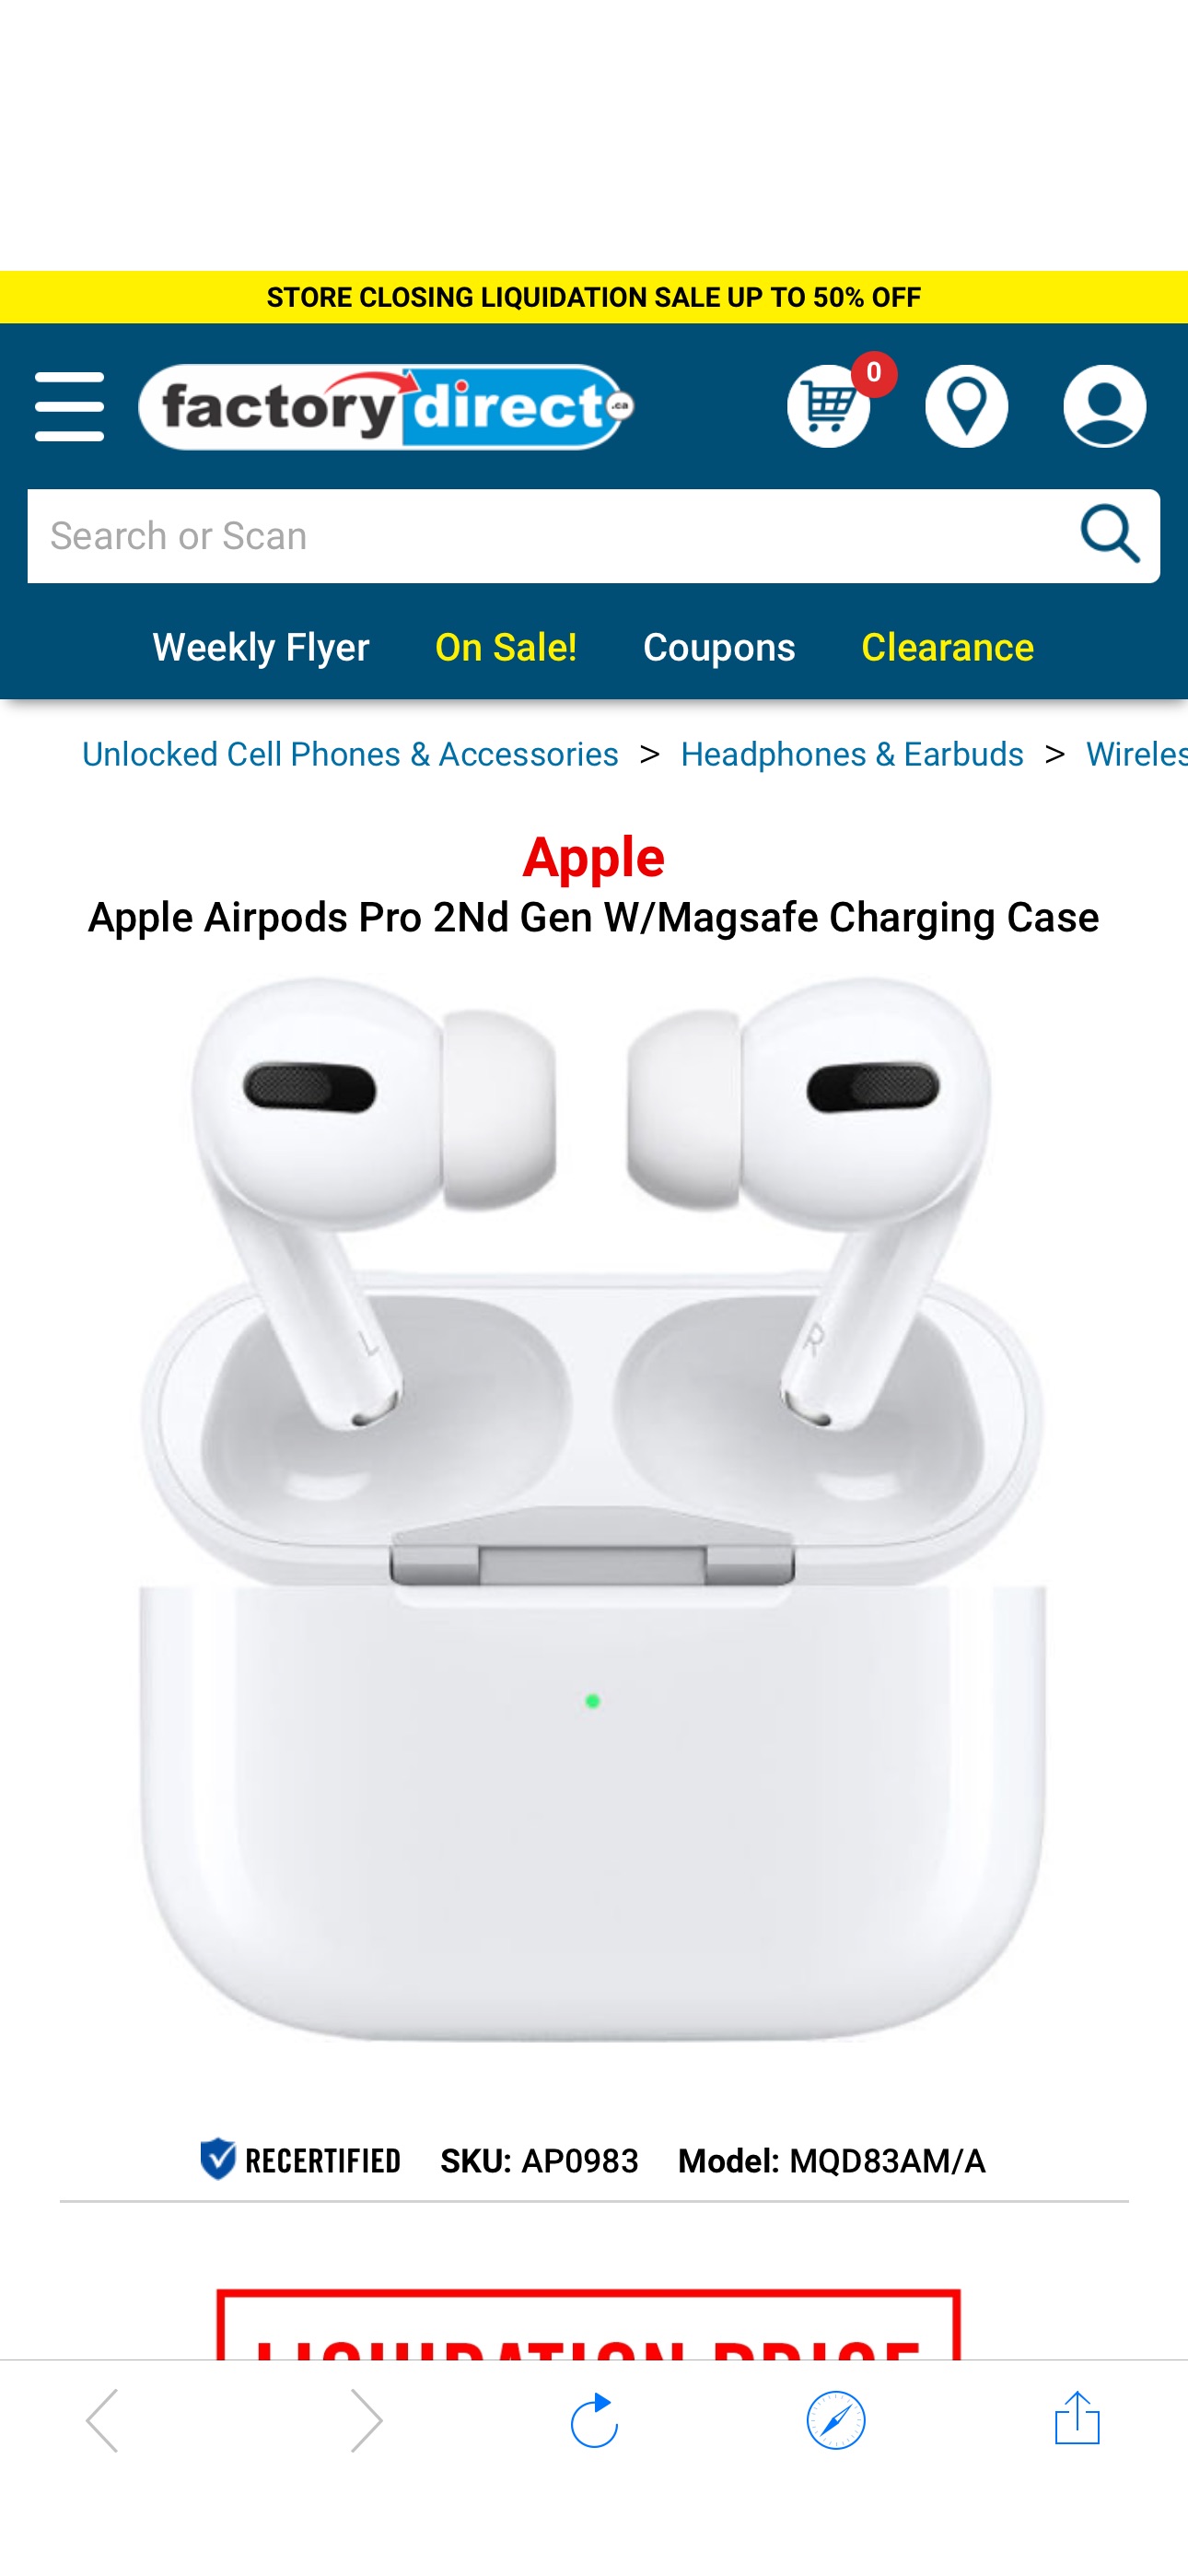 Apple Airpods Pro 2Nd Gen W/Magsafe Charging Case MQD83AM/A AP0983 - Canada’s best deals on Electronics, TVs, Unlocked Cell Phones, Macbooks, Laptops, Kitchen Appliances, Toys, Bed and Bathroom produc